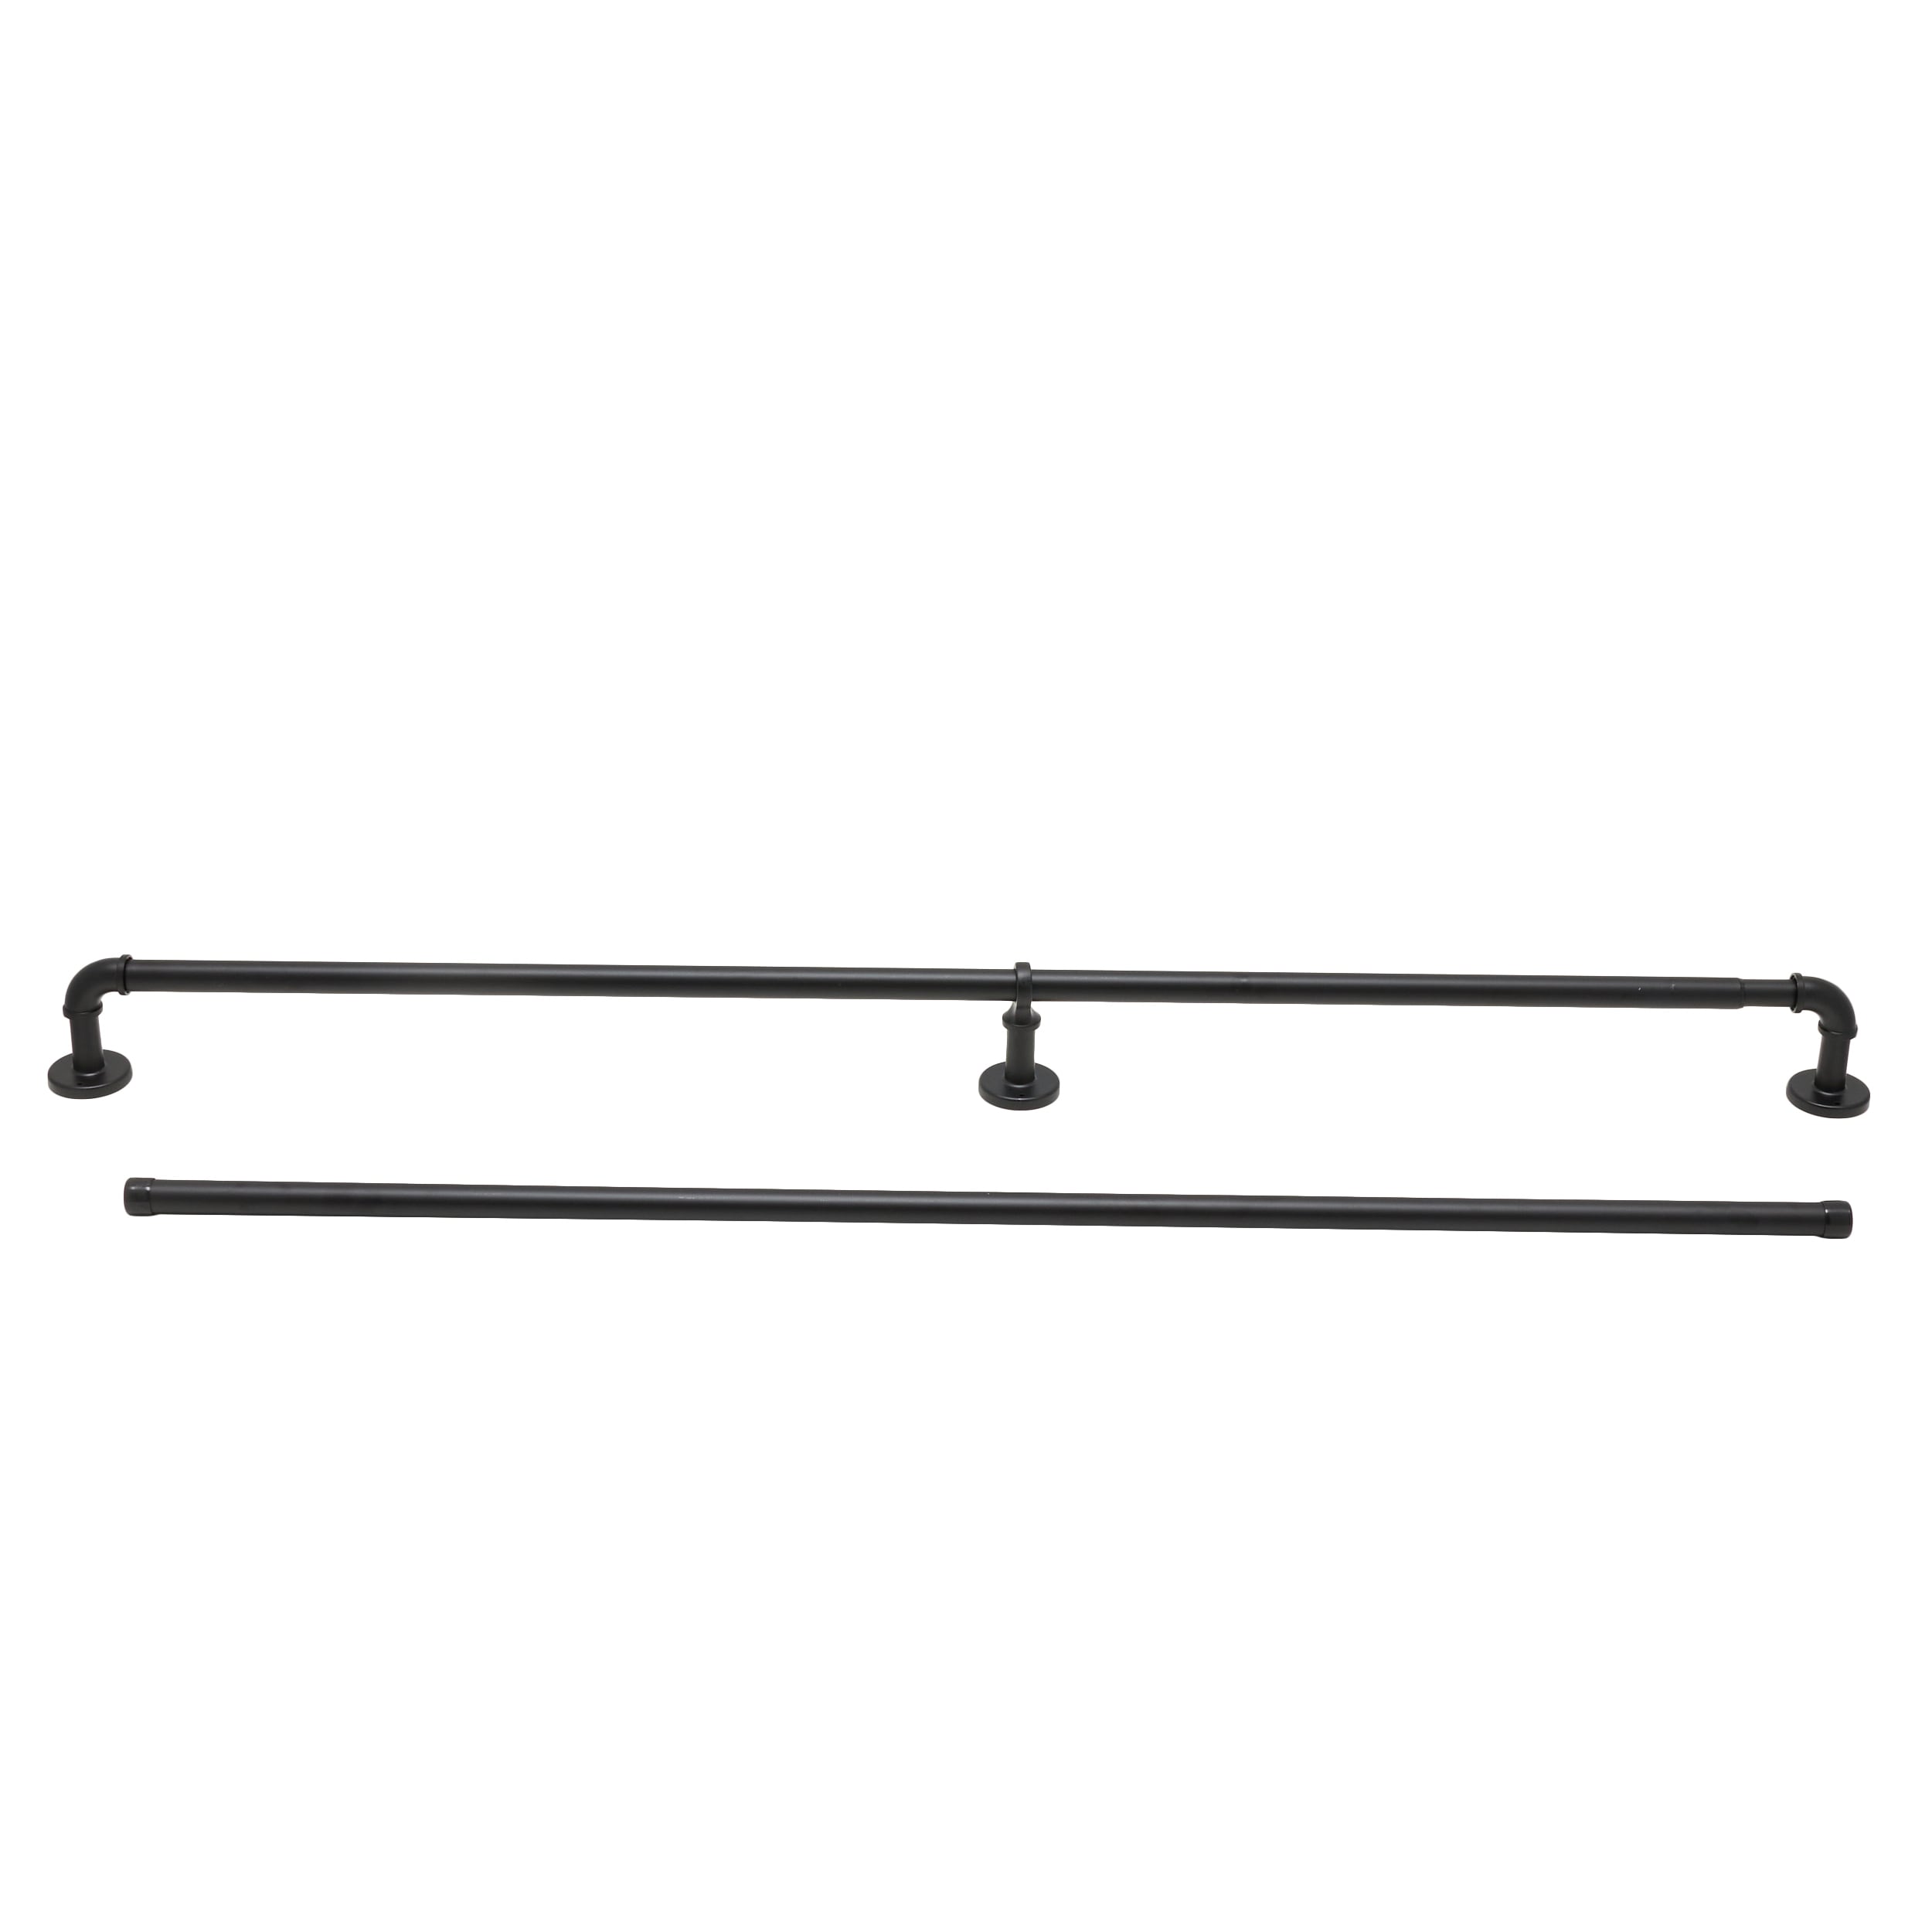  Black Curtain Rods 2 Pack, Small Curtain Rods for